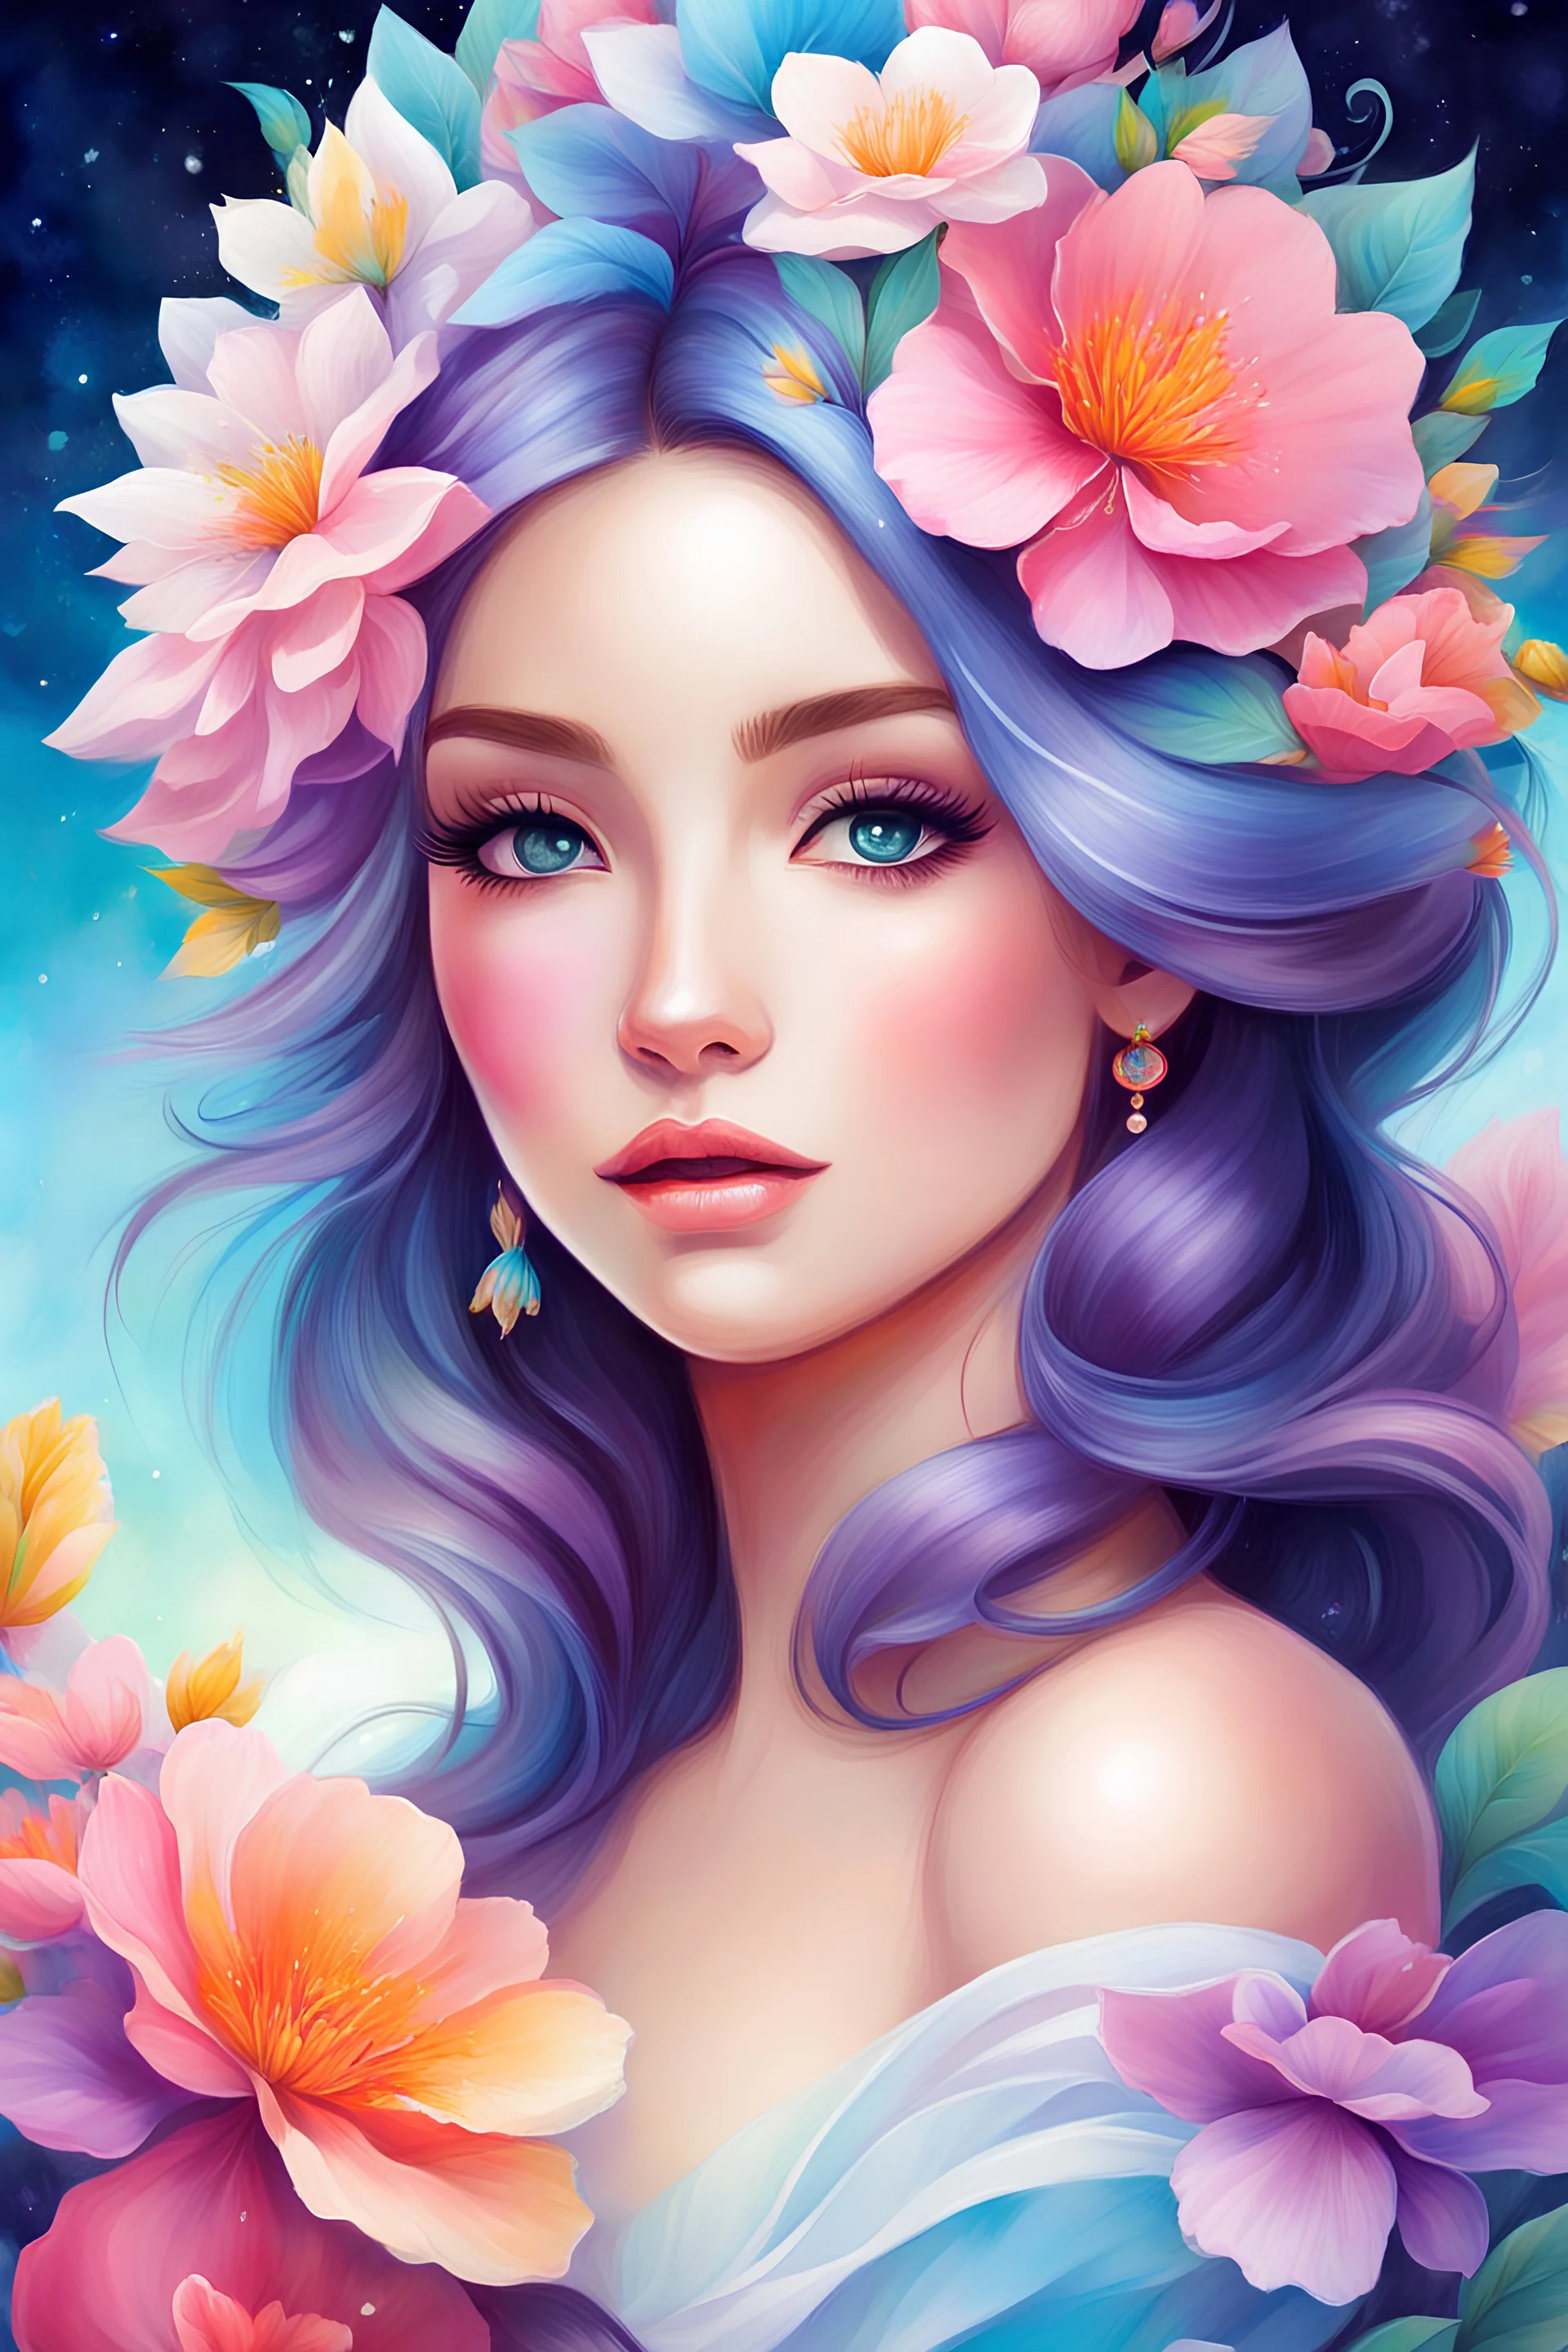 a painting of a woman with flowers in her hair, rossdraws pastel vibrant, beautiful fantasy art portrait, by Jeremiah Ketner, beautiful fantasy portrait, girl in flowers, woman in flowers, beautiful anime portrait, inspired by Anna Dittmann, colorful watercolor painting, watercolor detailed art, vibrant watercolor painting, exquisite digital illustration, by Anna Dittmann, stunning anime face portrait